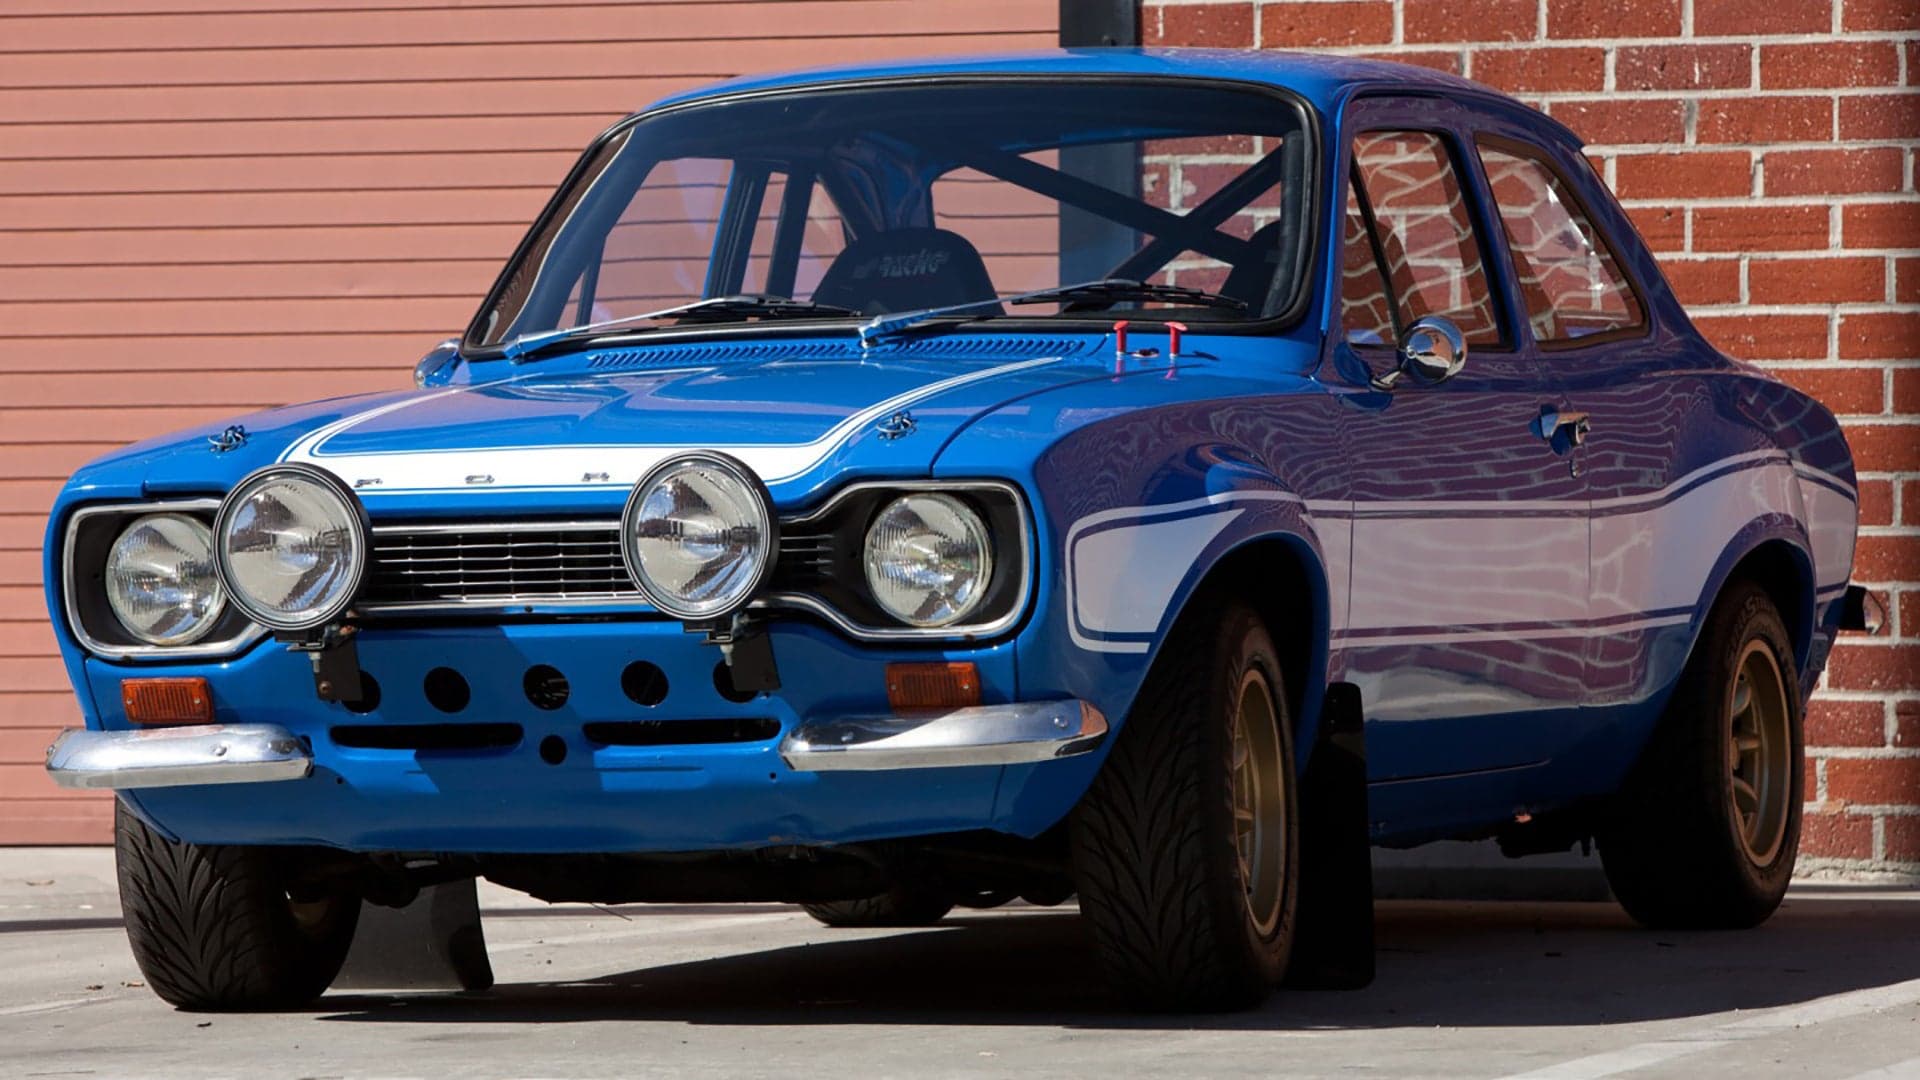 Learn All About Paul Walker’s Ford Escort RS1600 From Fast and Furious 6